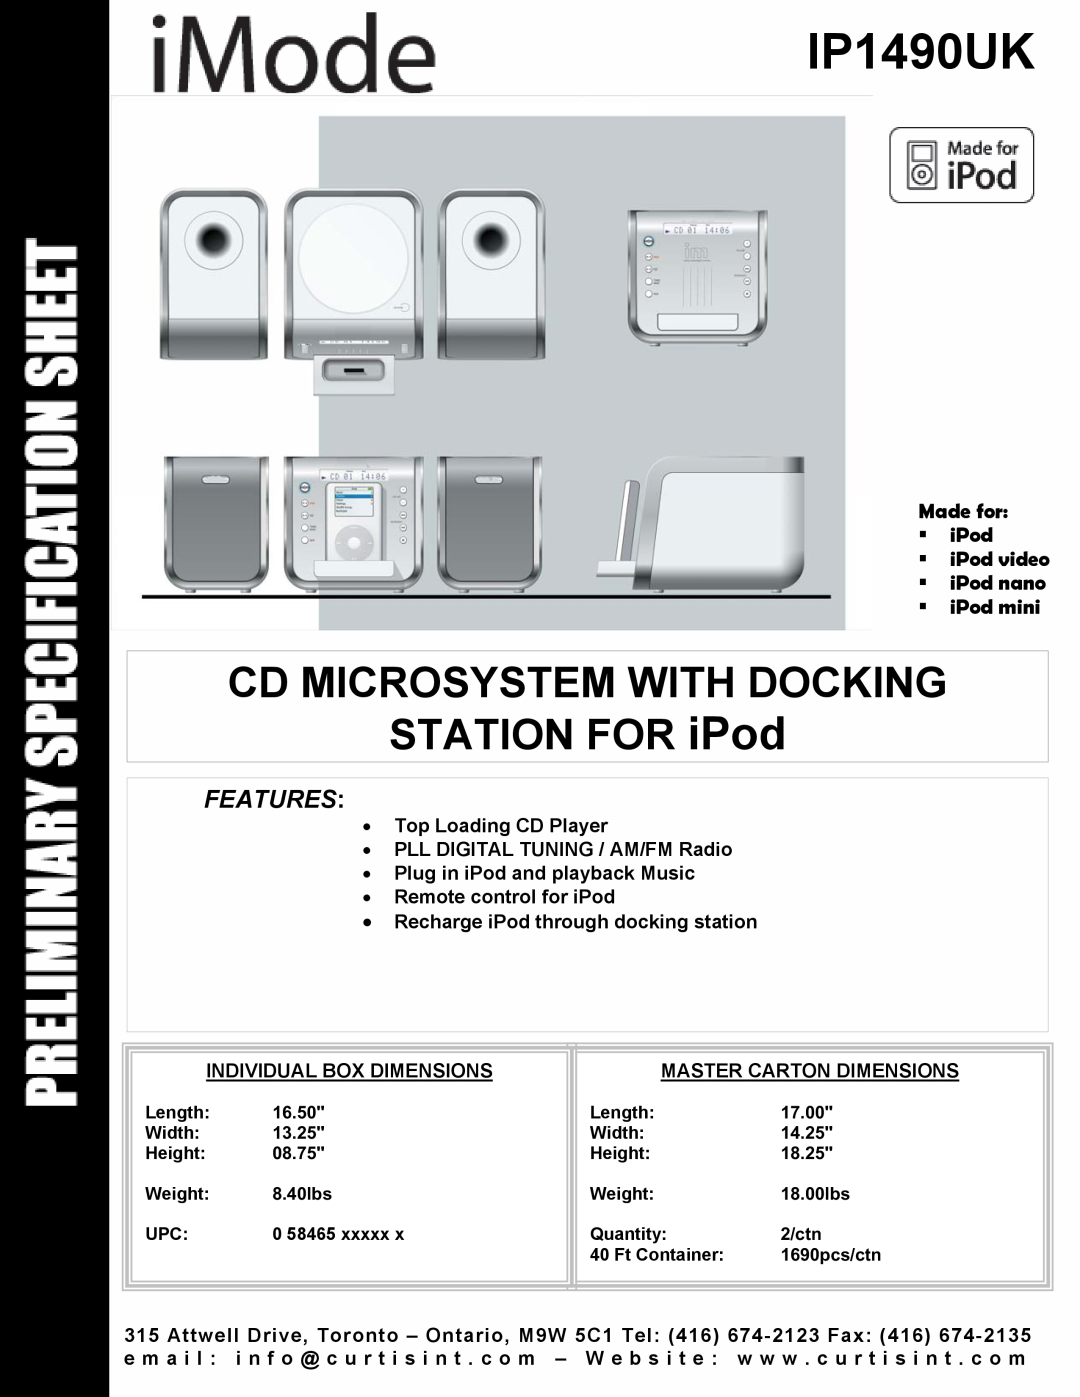 Curtis IP1490UK dimensions CD MICROSYSTEM WITH DOCKING STATION FOR iPod, Features, Made for ƒ iPod 